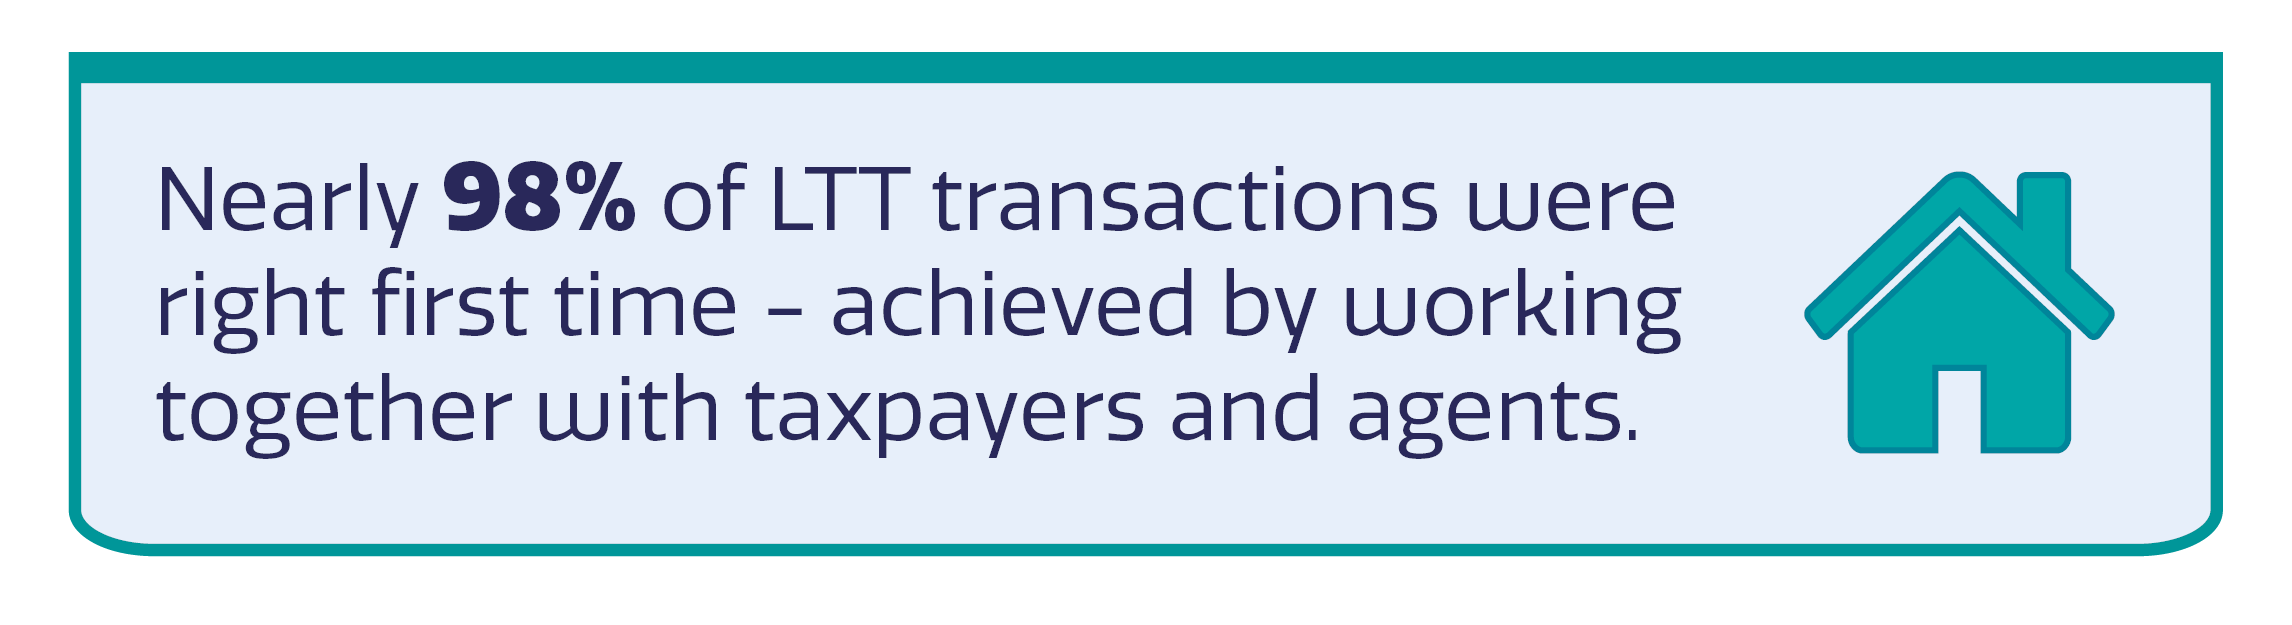 Green house icon with text: 'Nearly 98% of LTT transactions were right first time - achieved by working together with taxpayers and agents.'